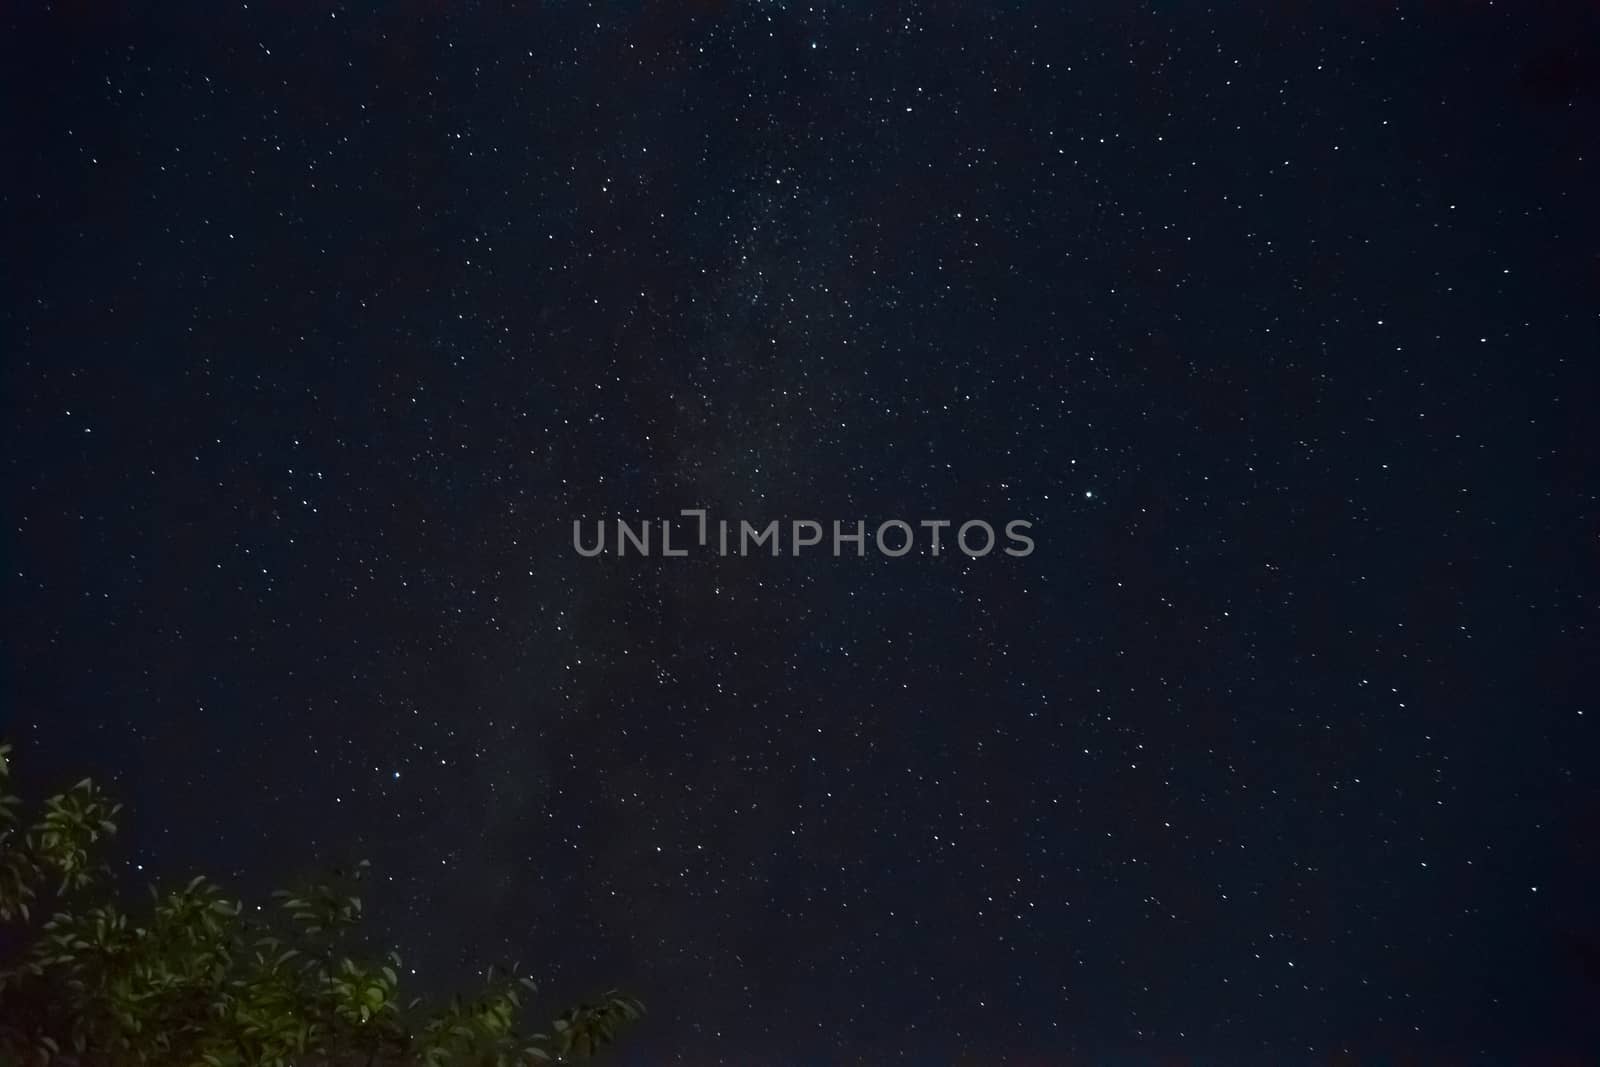 Long exposure night photo. A lot of stars with a lot of constellations. Nebula in sky with tree branch in frame. Night landscape with soft noise effect.